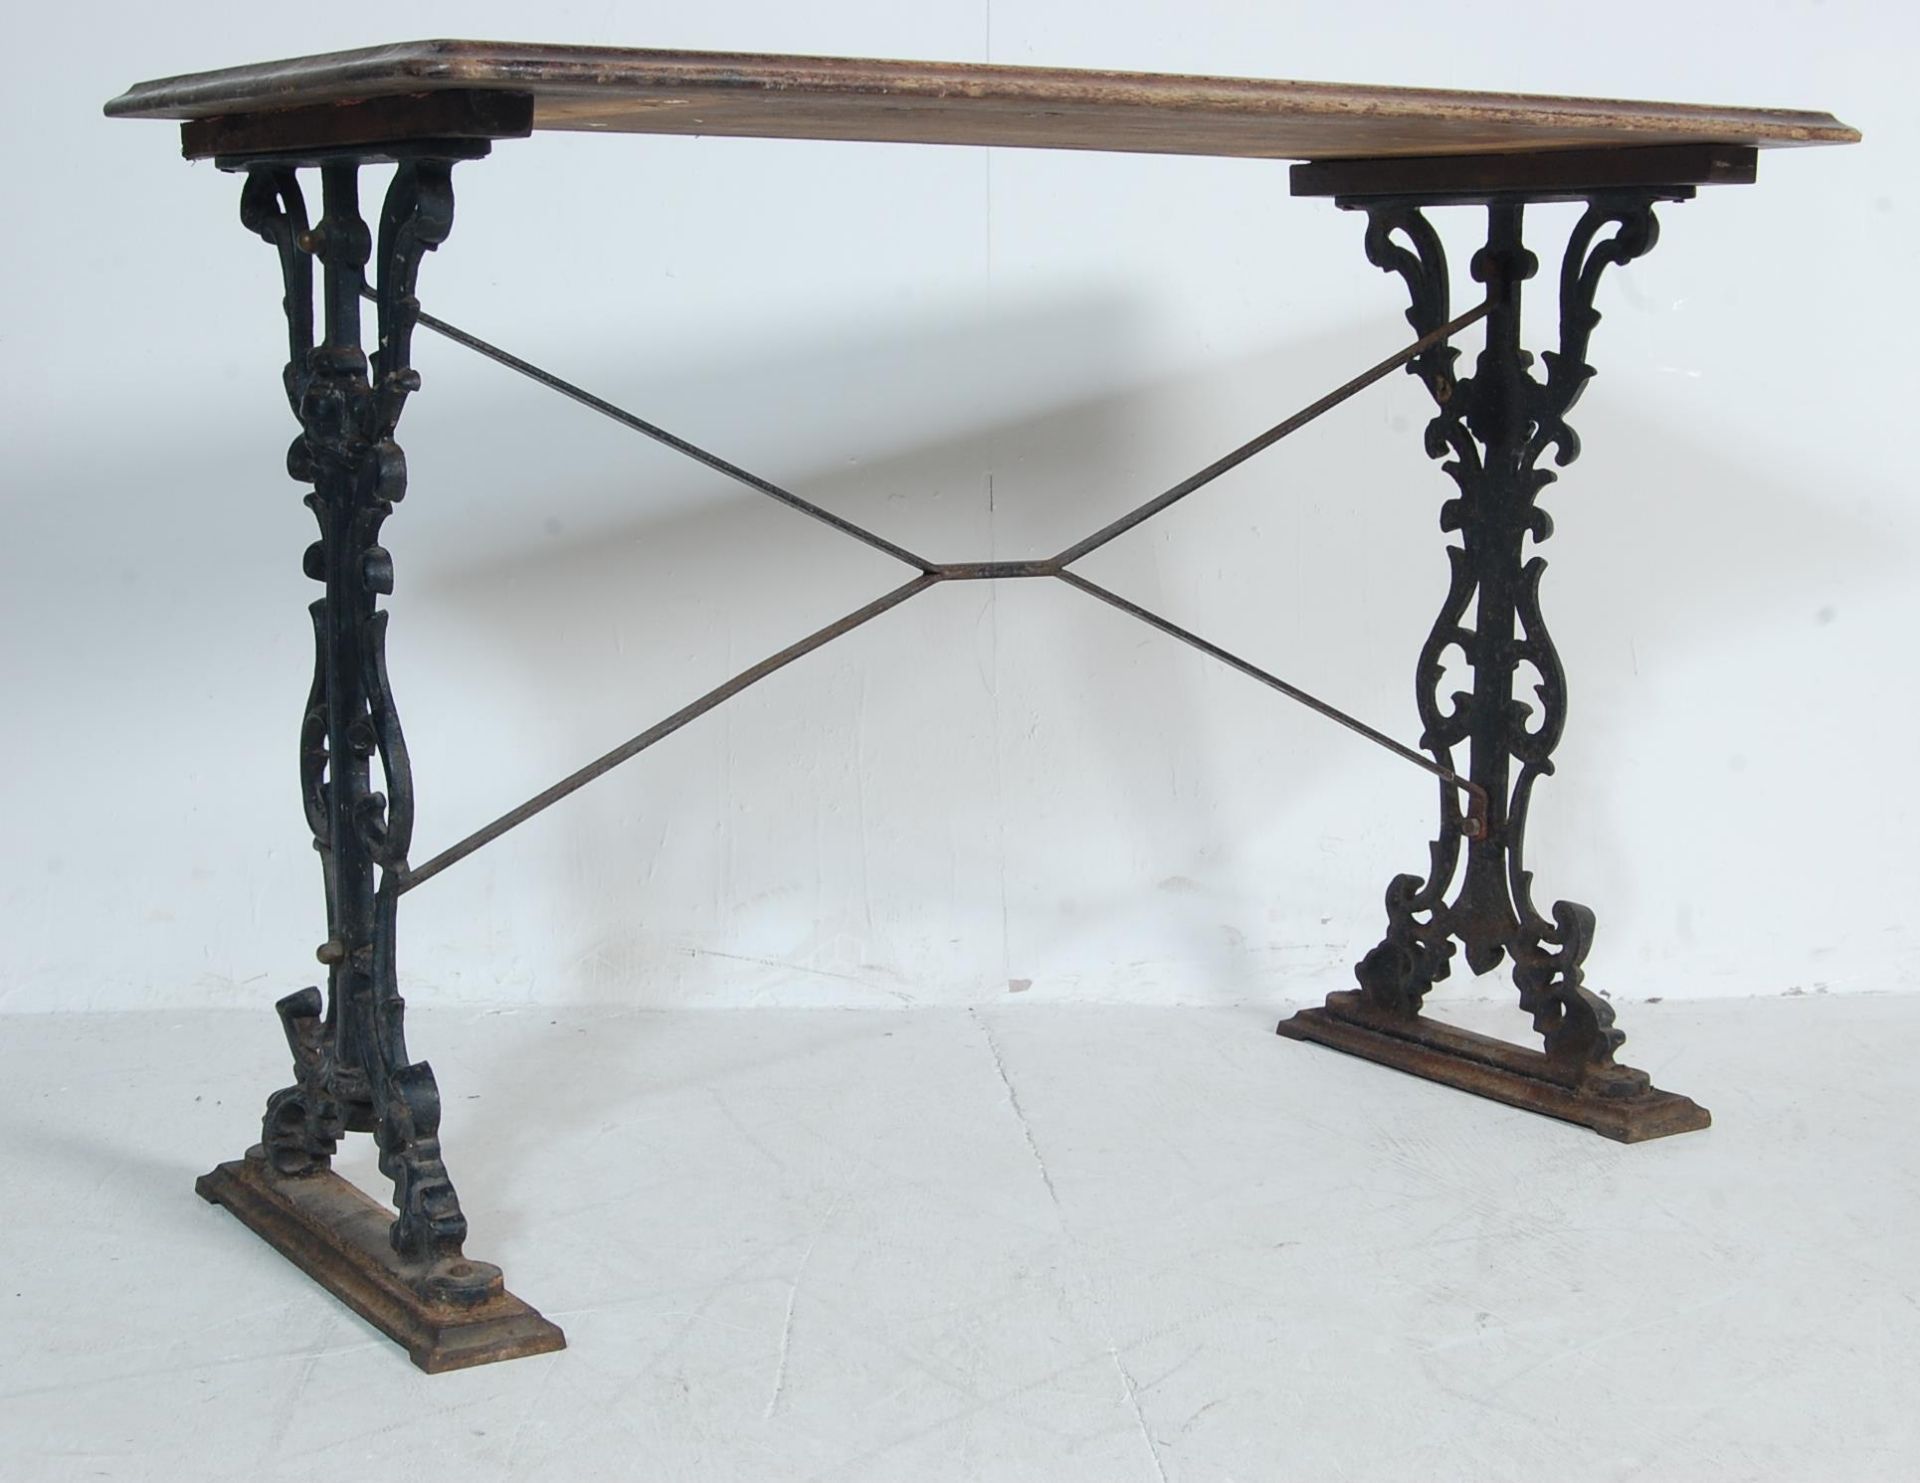 19TH CENTURY VICTORIAN CAST IRON AND WOOD GARDEN TABLE / PUB TABLE